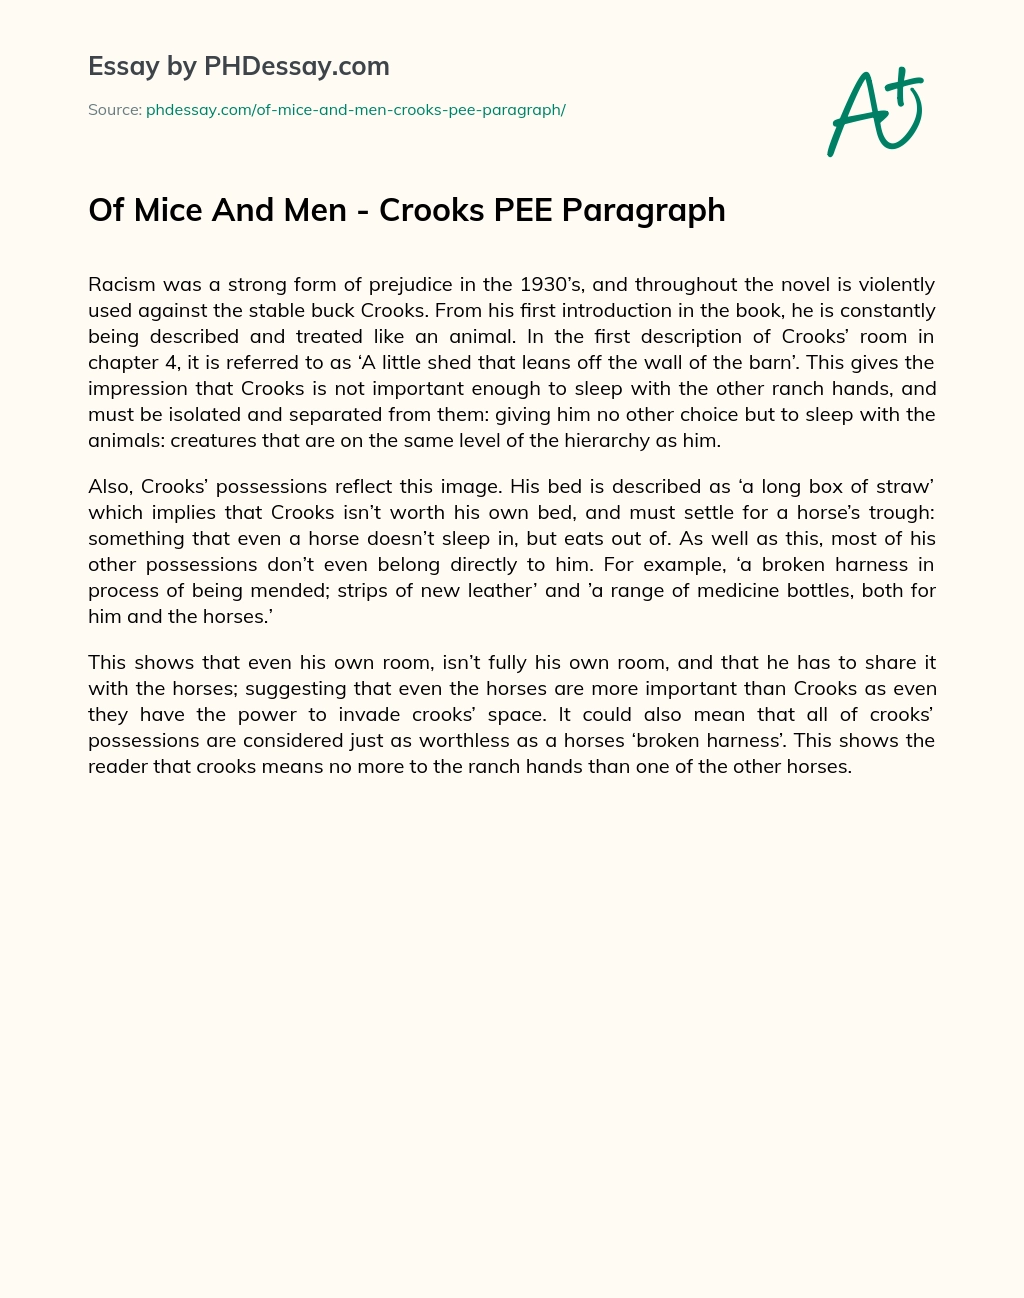 Of Mice And Men – Crooks PEE Paragraph essay